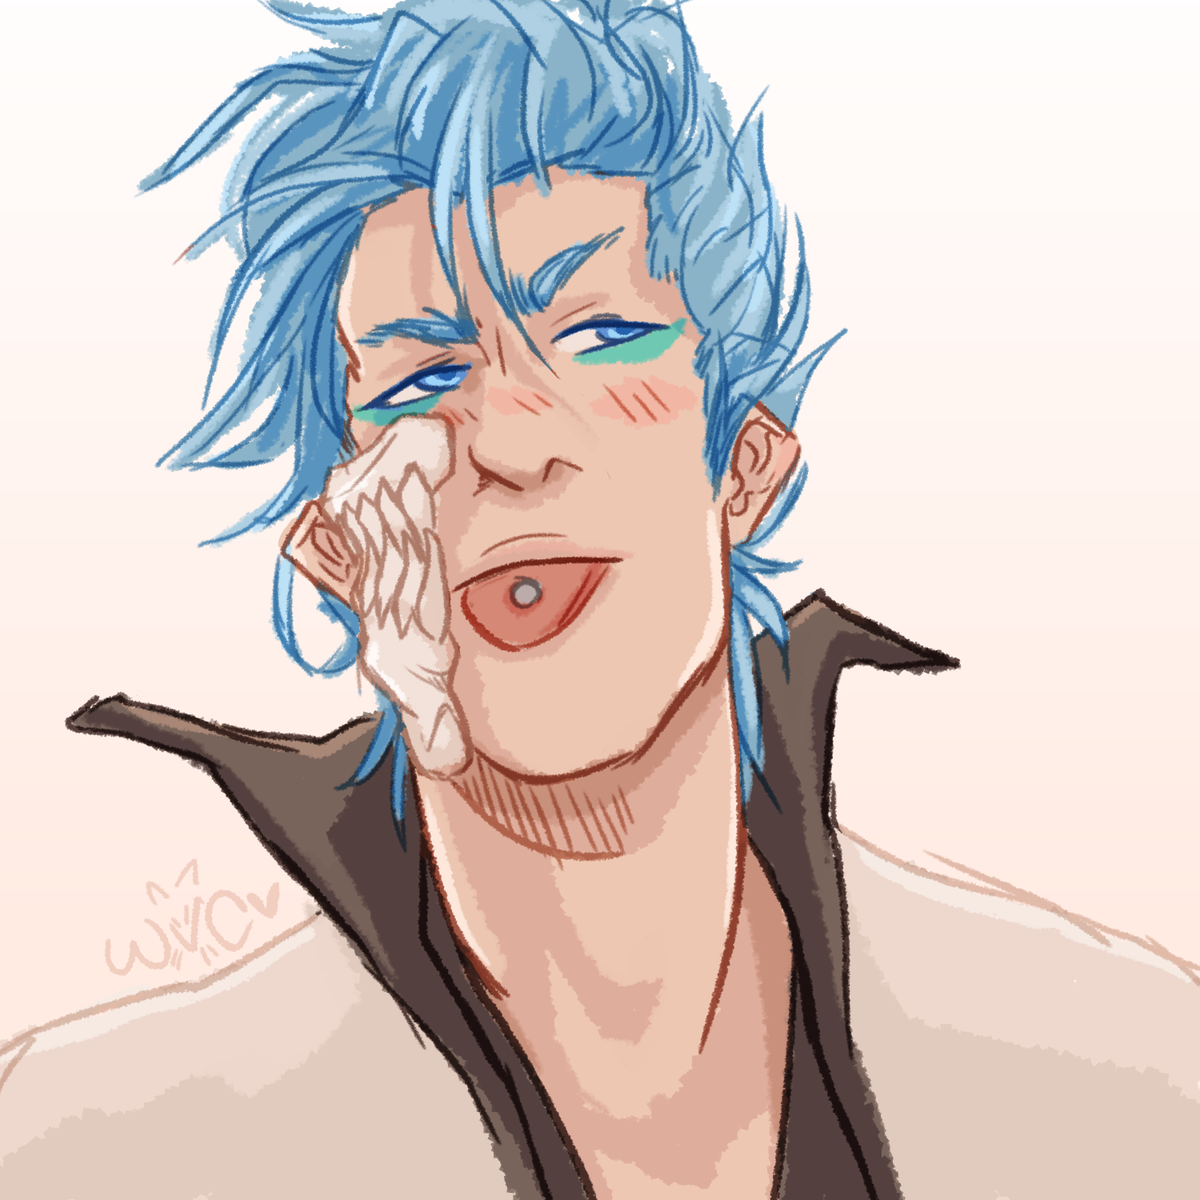 I like the idea of Yuzu somehow going full Mom on Grimmjow.G: *looks guilty...